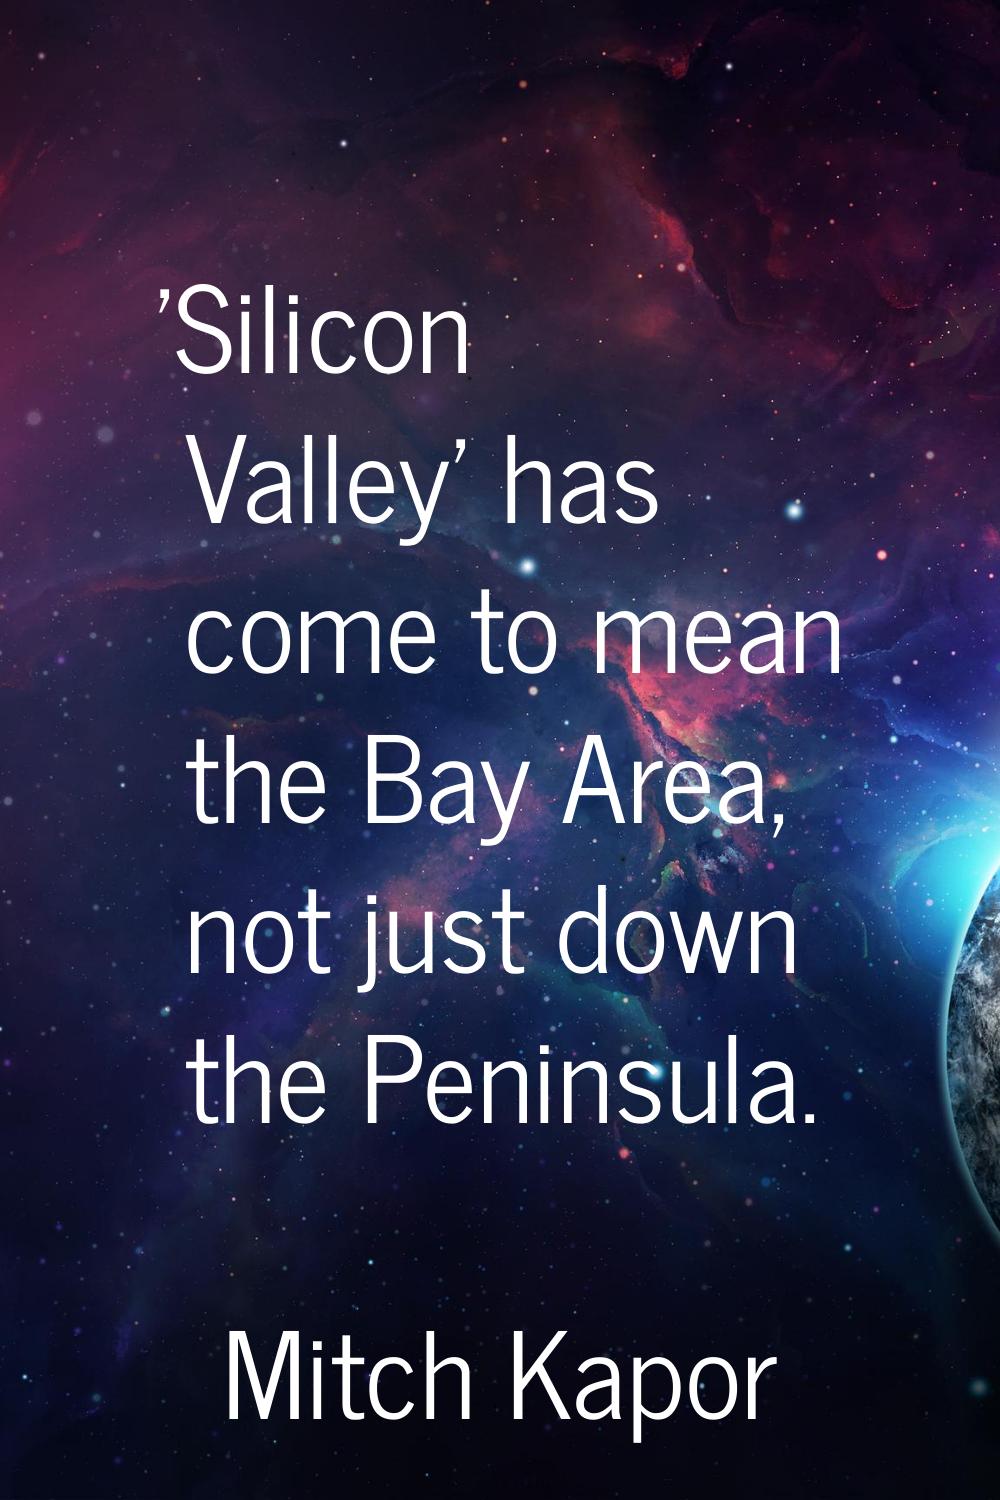 'Silicon Valley' has come to mean the Bay Area, not just down the Peninsula.